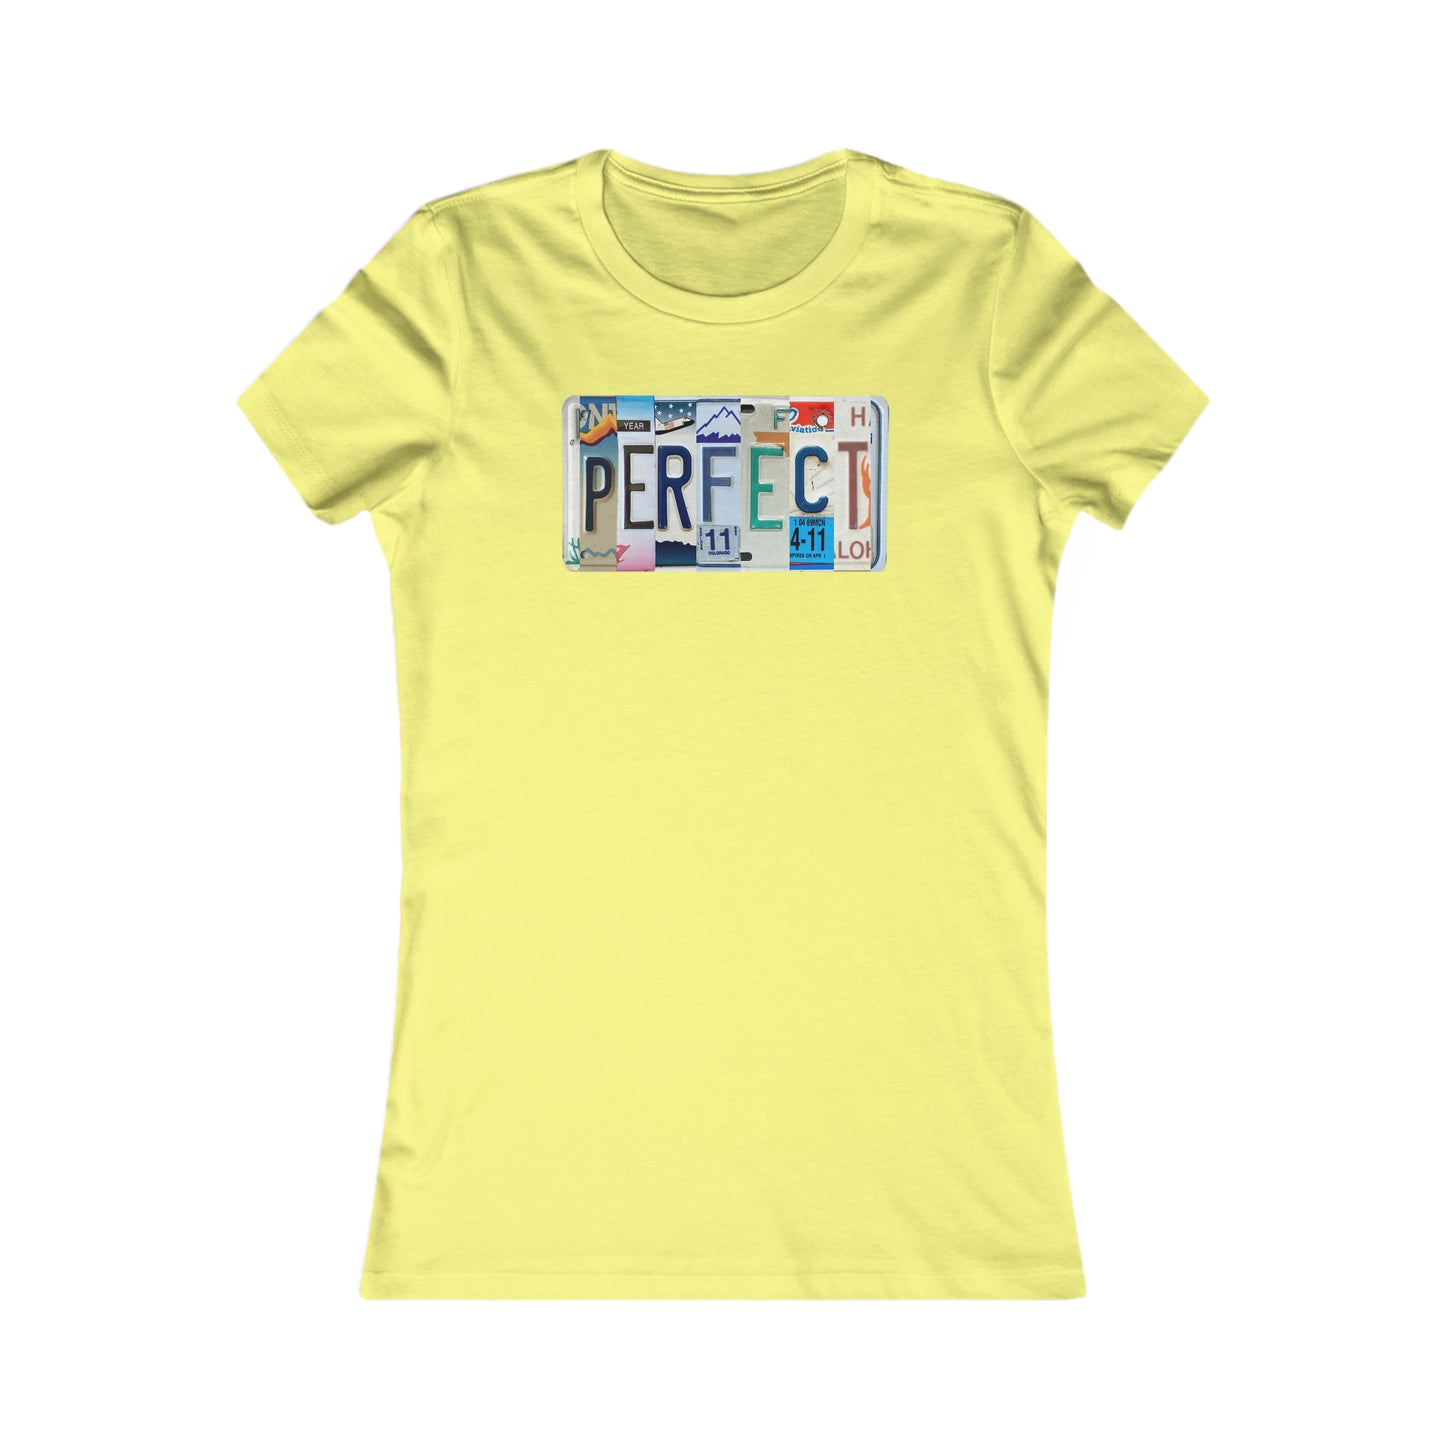 Stylish 'Perfect' Bella and Canvas Women's Favorite Tee - Comfortable and Versatile Shirt